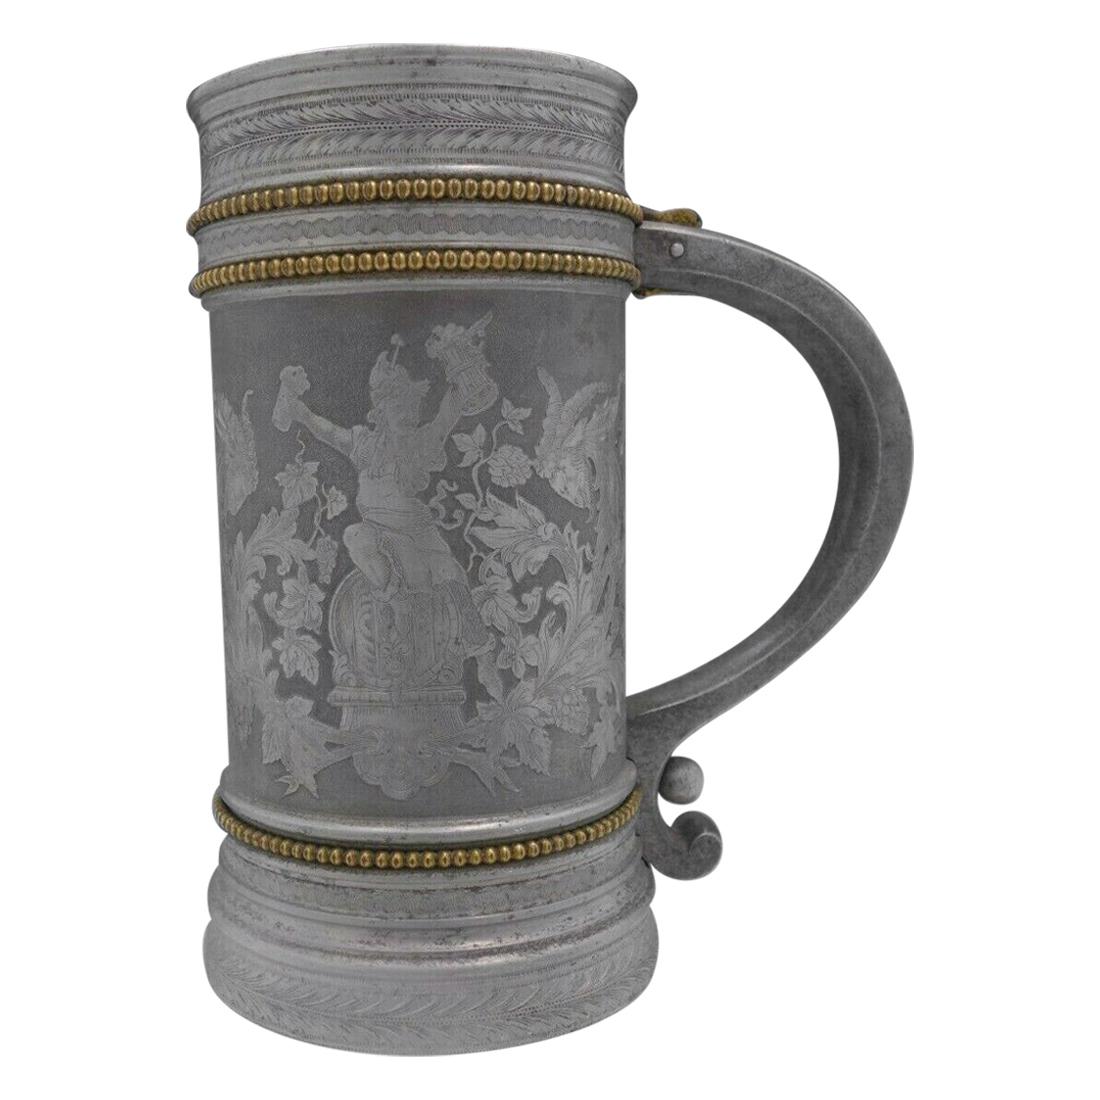 Acid Etched Mixed Metals Figurative Mug by Gorham Marked Number 11 For Sale